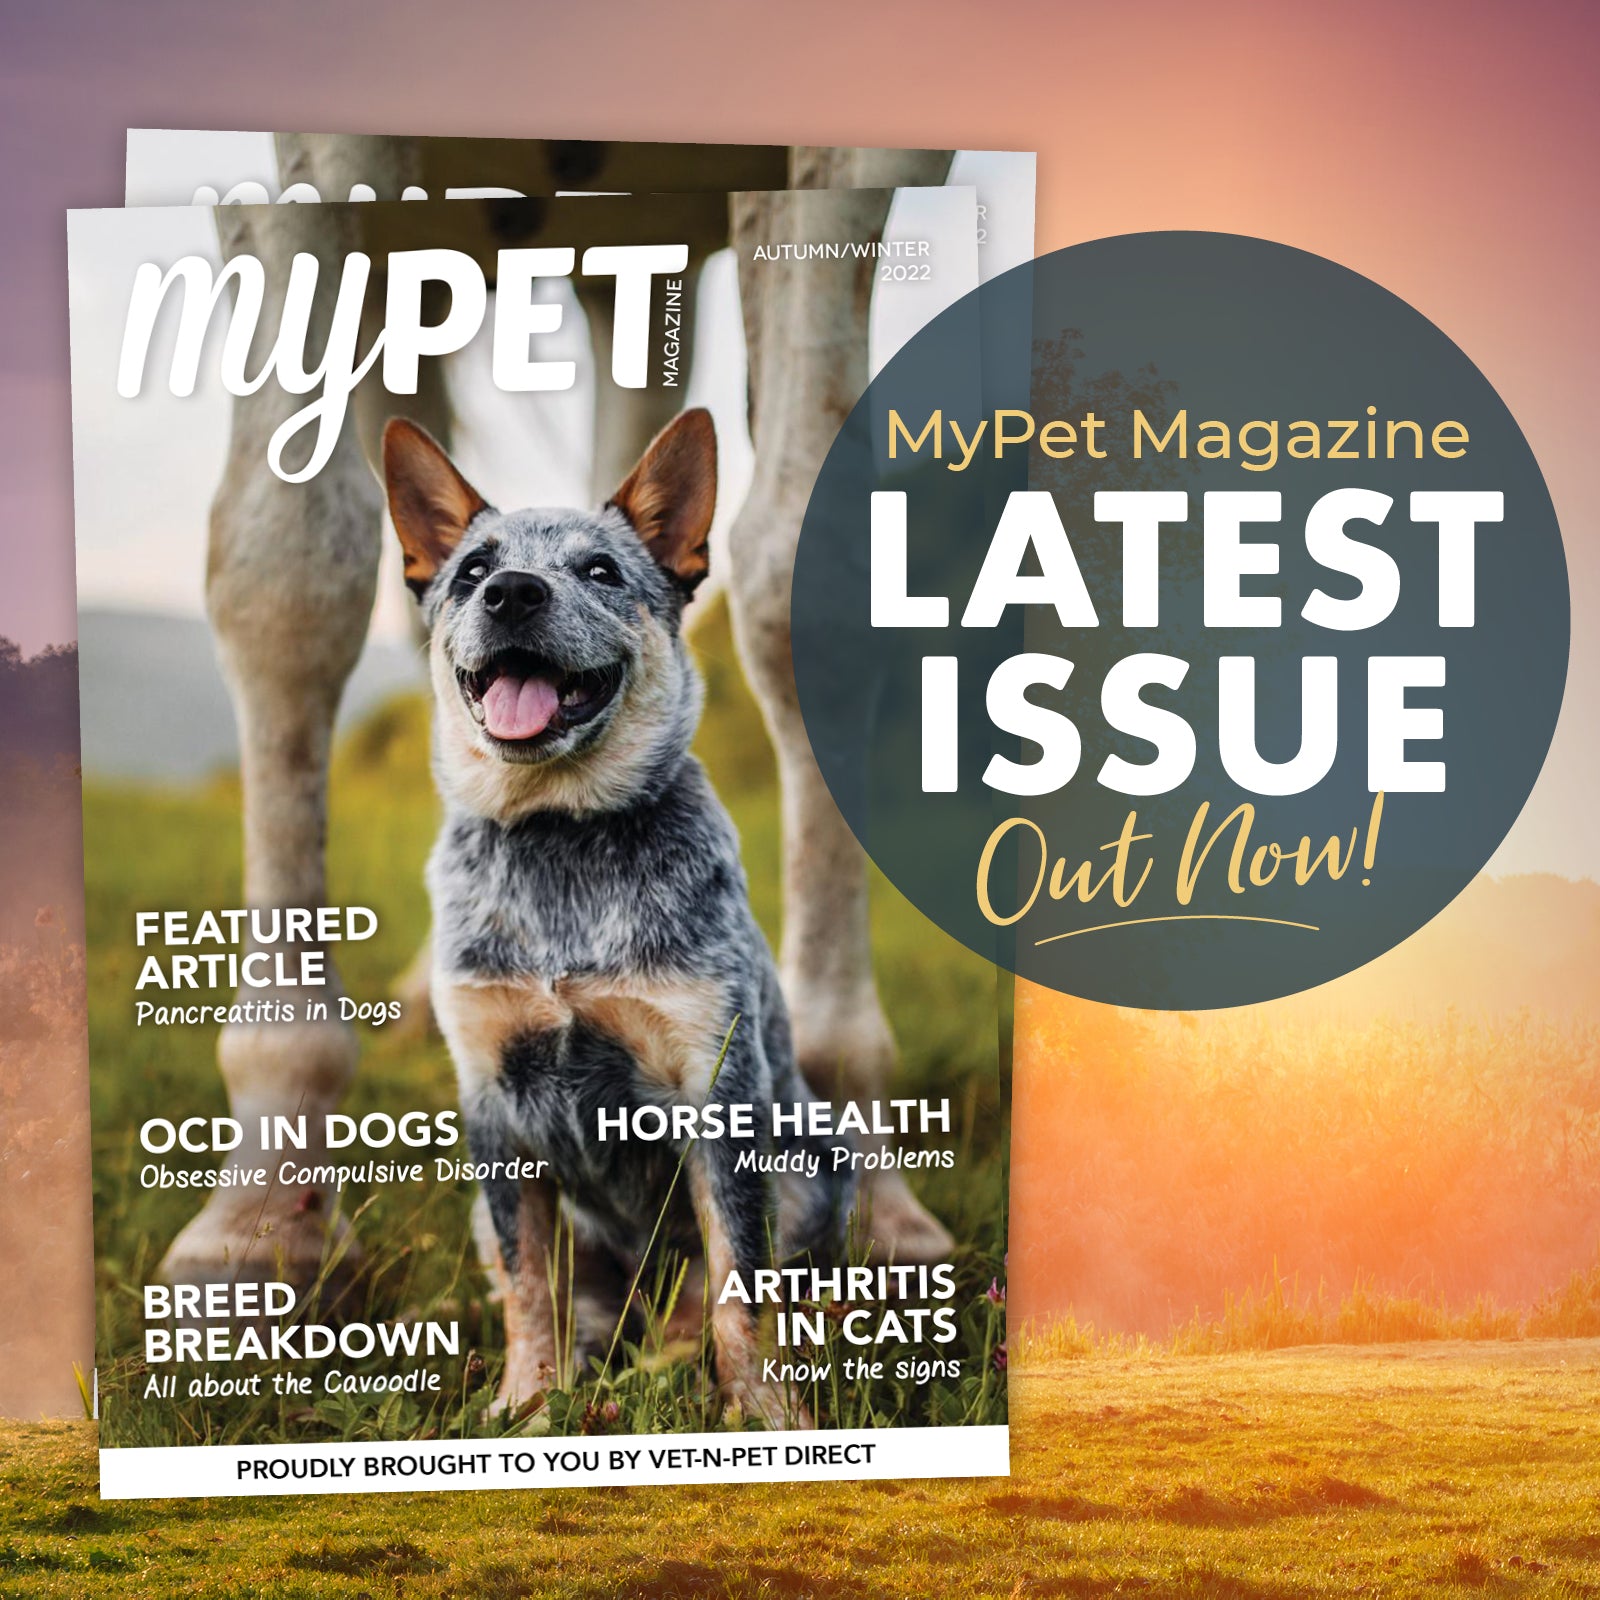 myPET Magazine FREE with every order